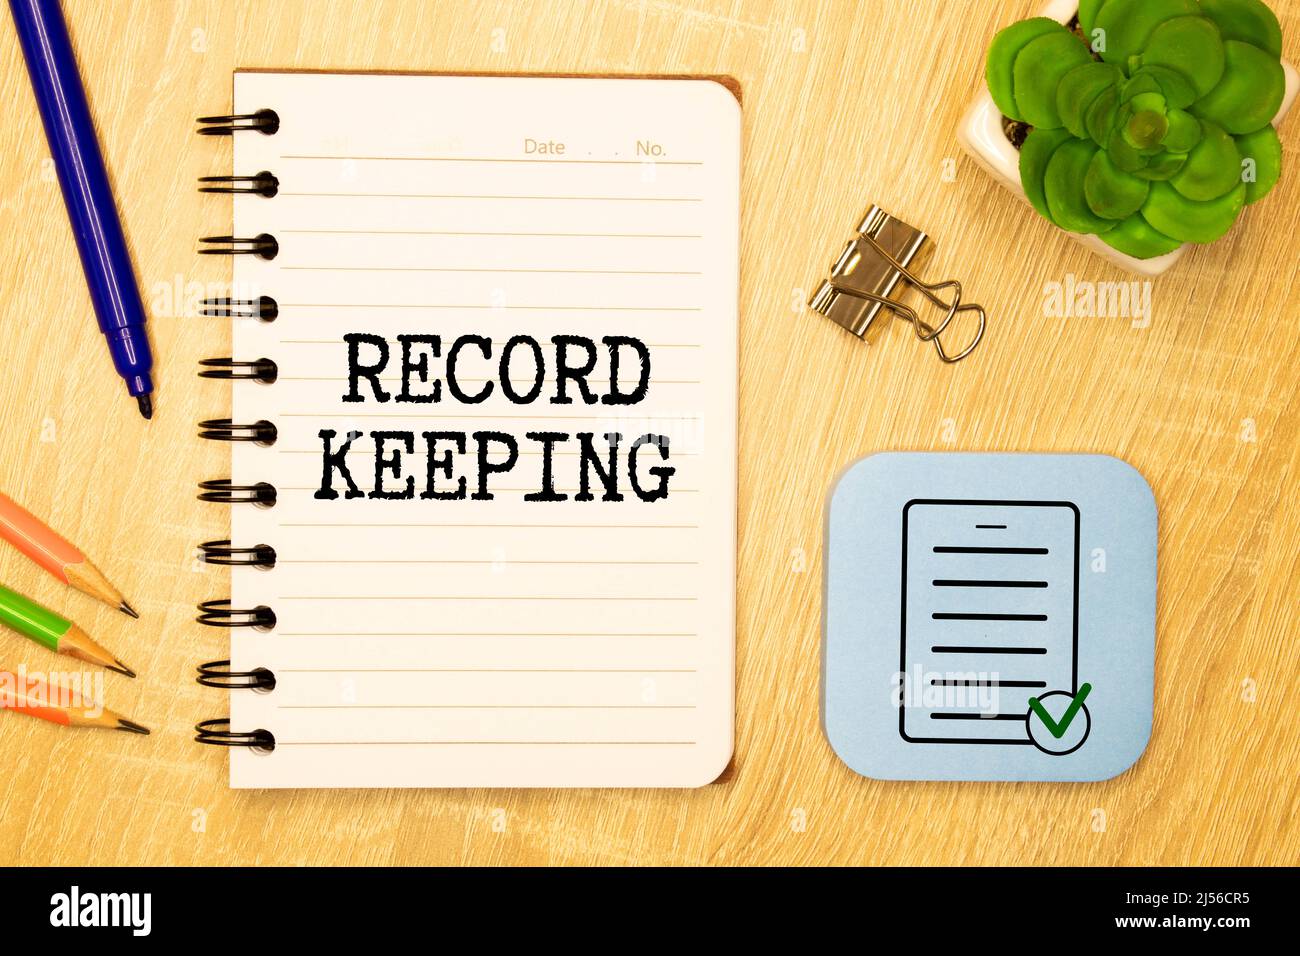 Record keeping text written on a notebook with pencils. Stock Photo